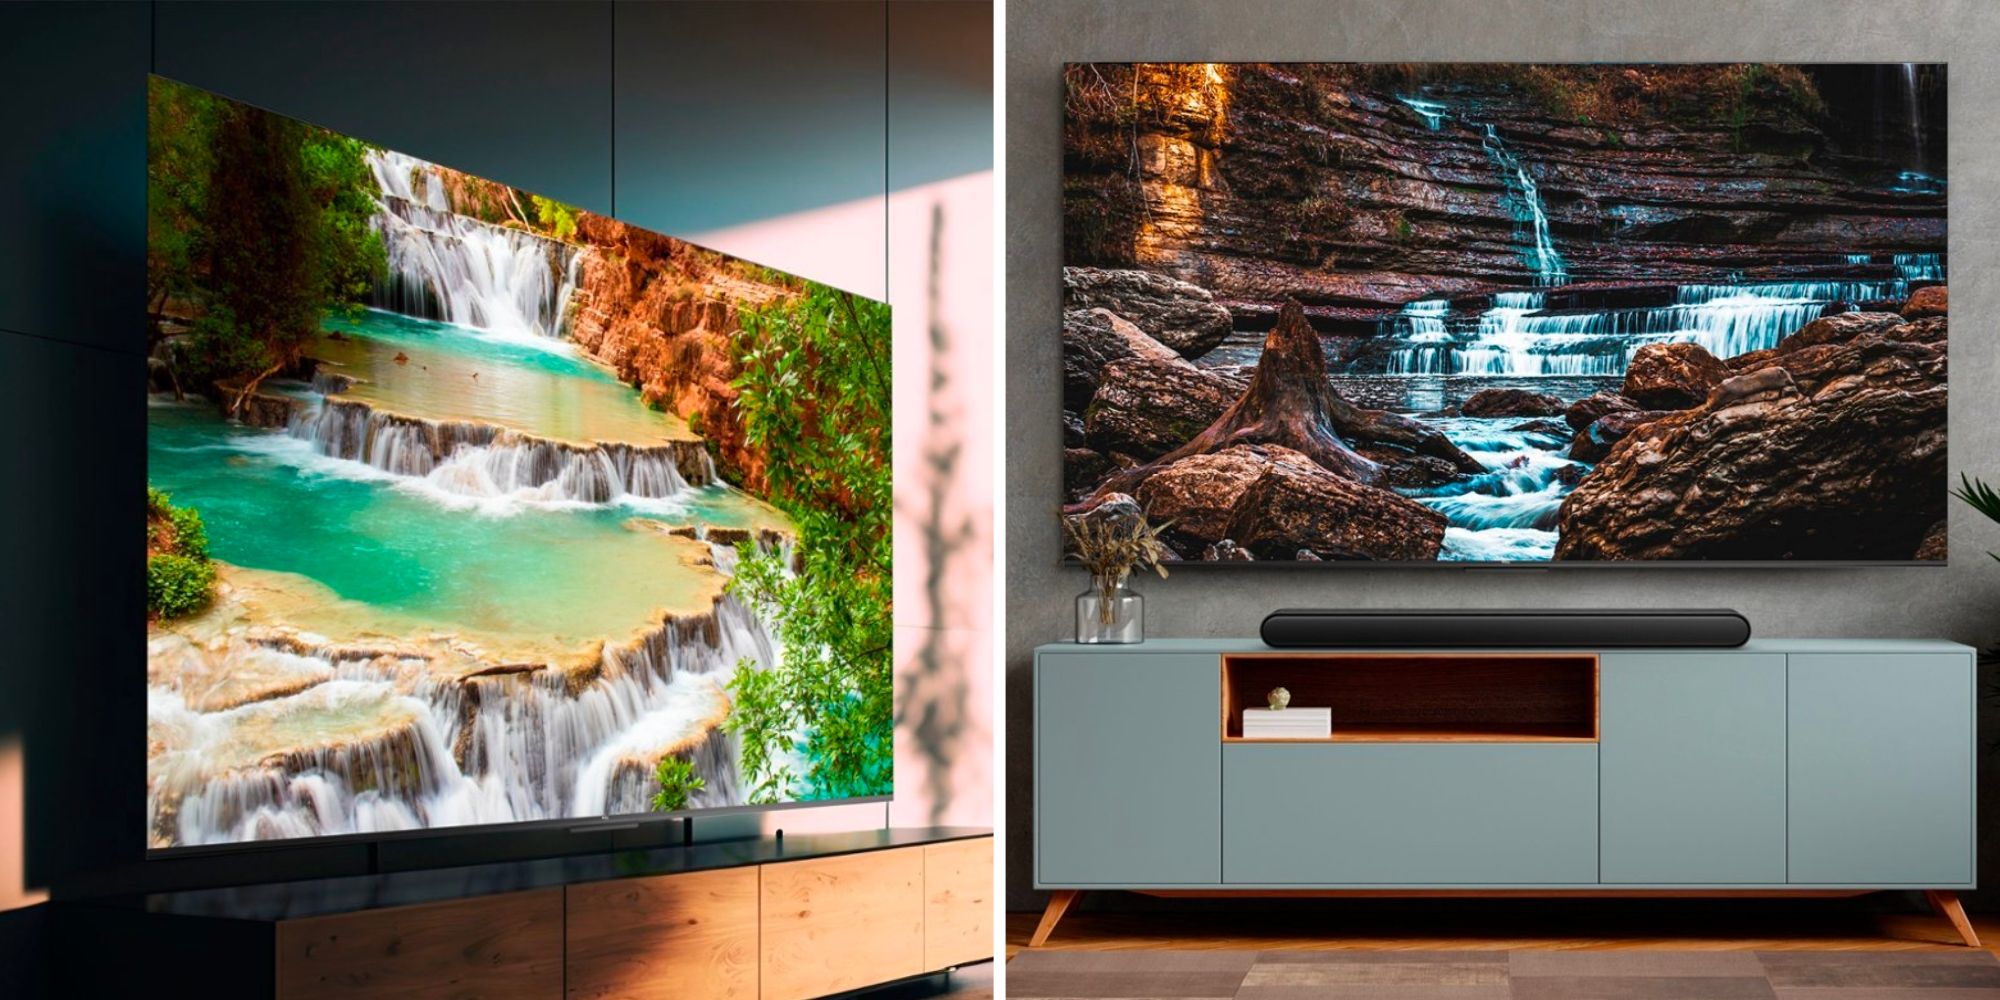 Images of the 85-inch TCL 4K Smart TV on sale